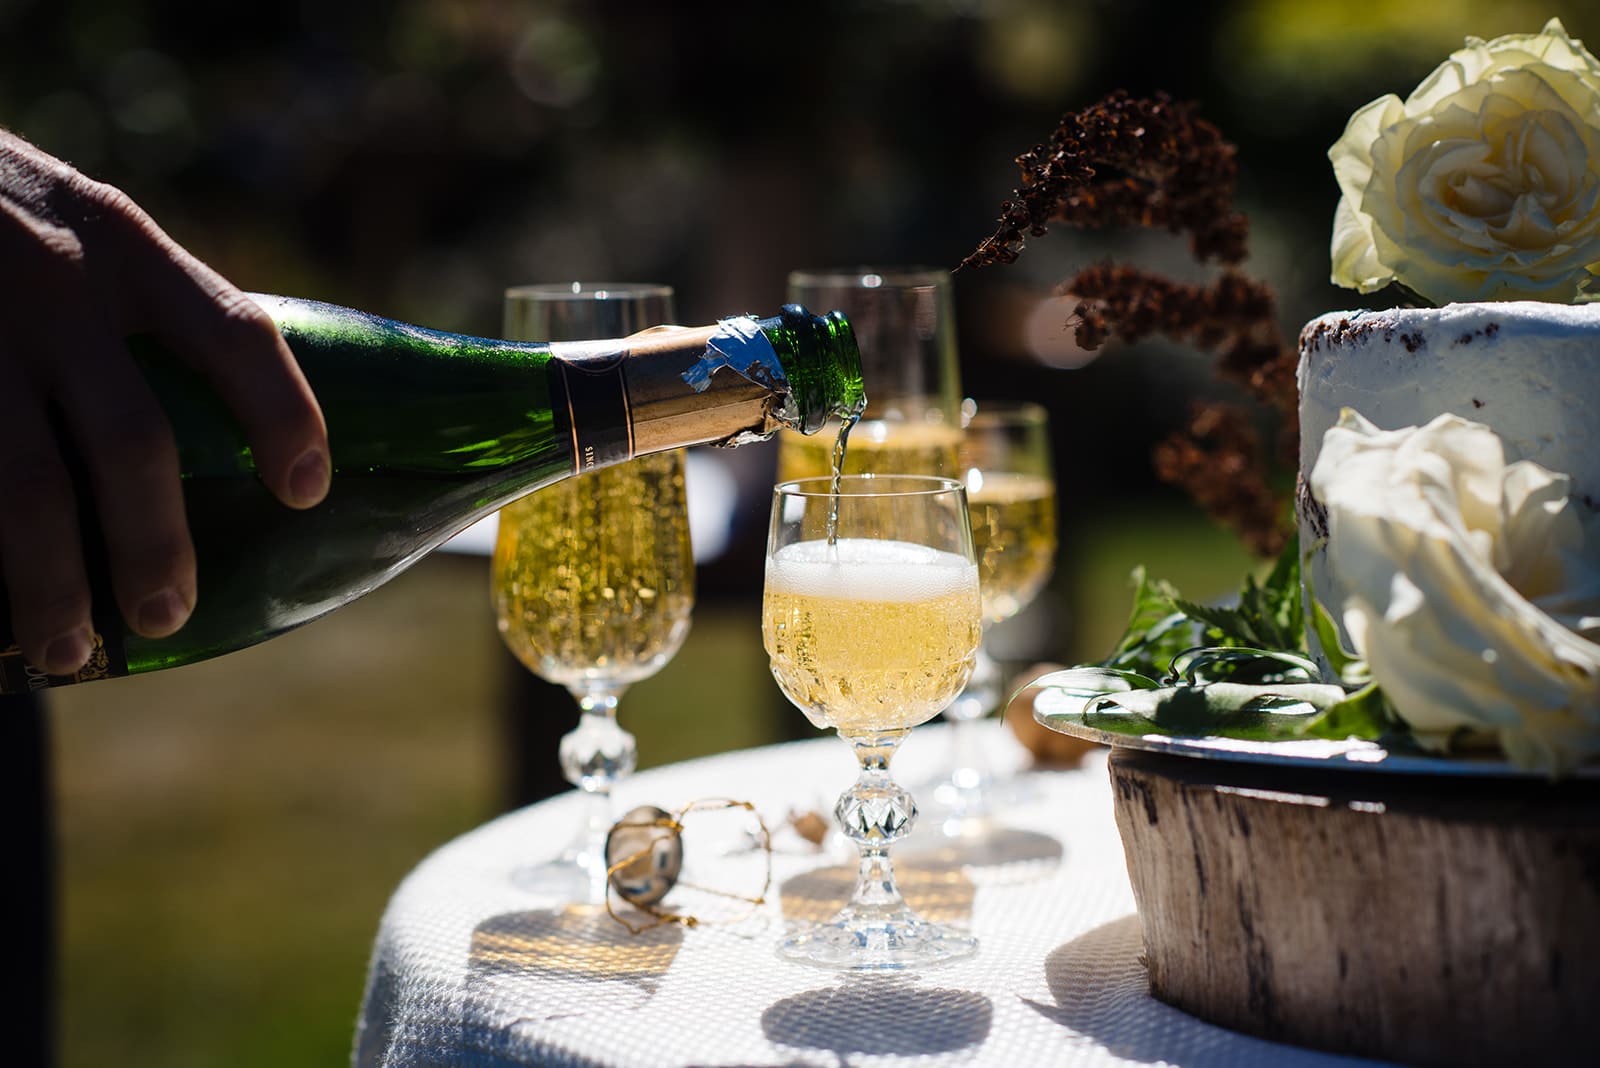 Bottle of champagne is poured into glasses to celebrate two people in love getting married